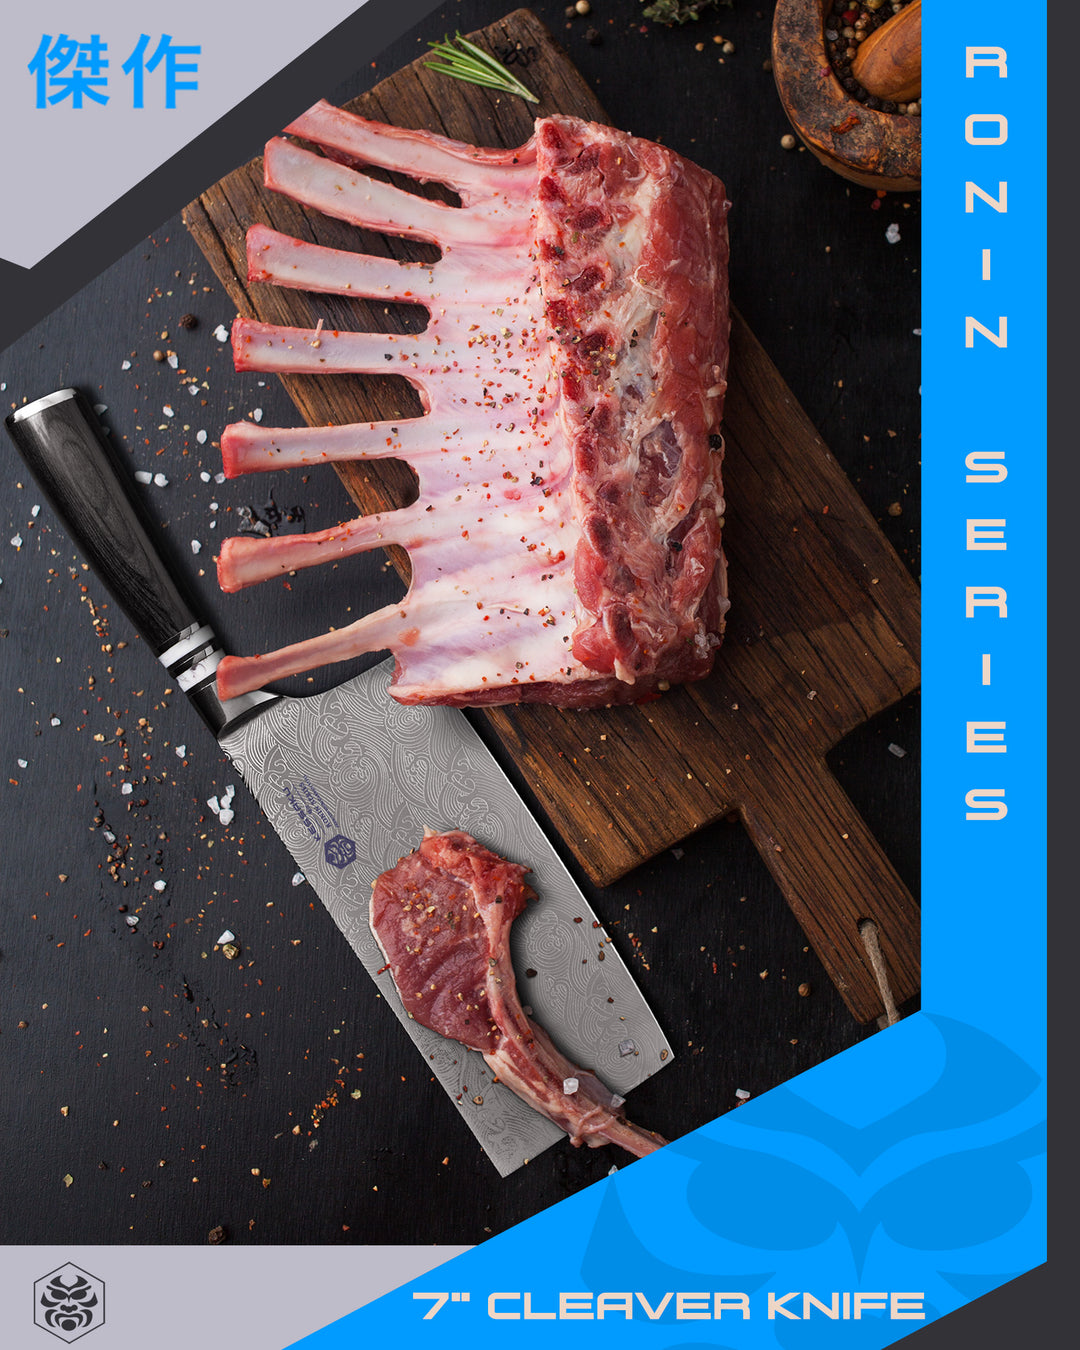 The Ronin Cleaver Knife separating a french rack of ribs